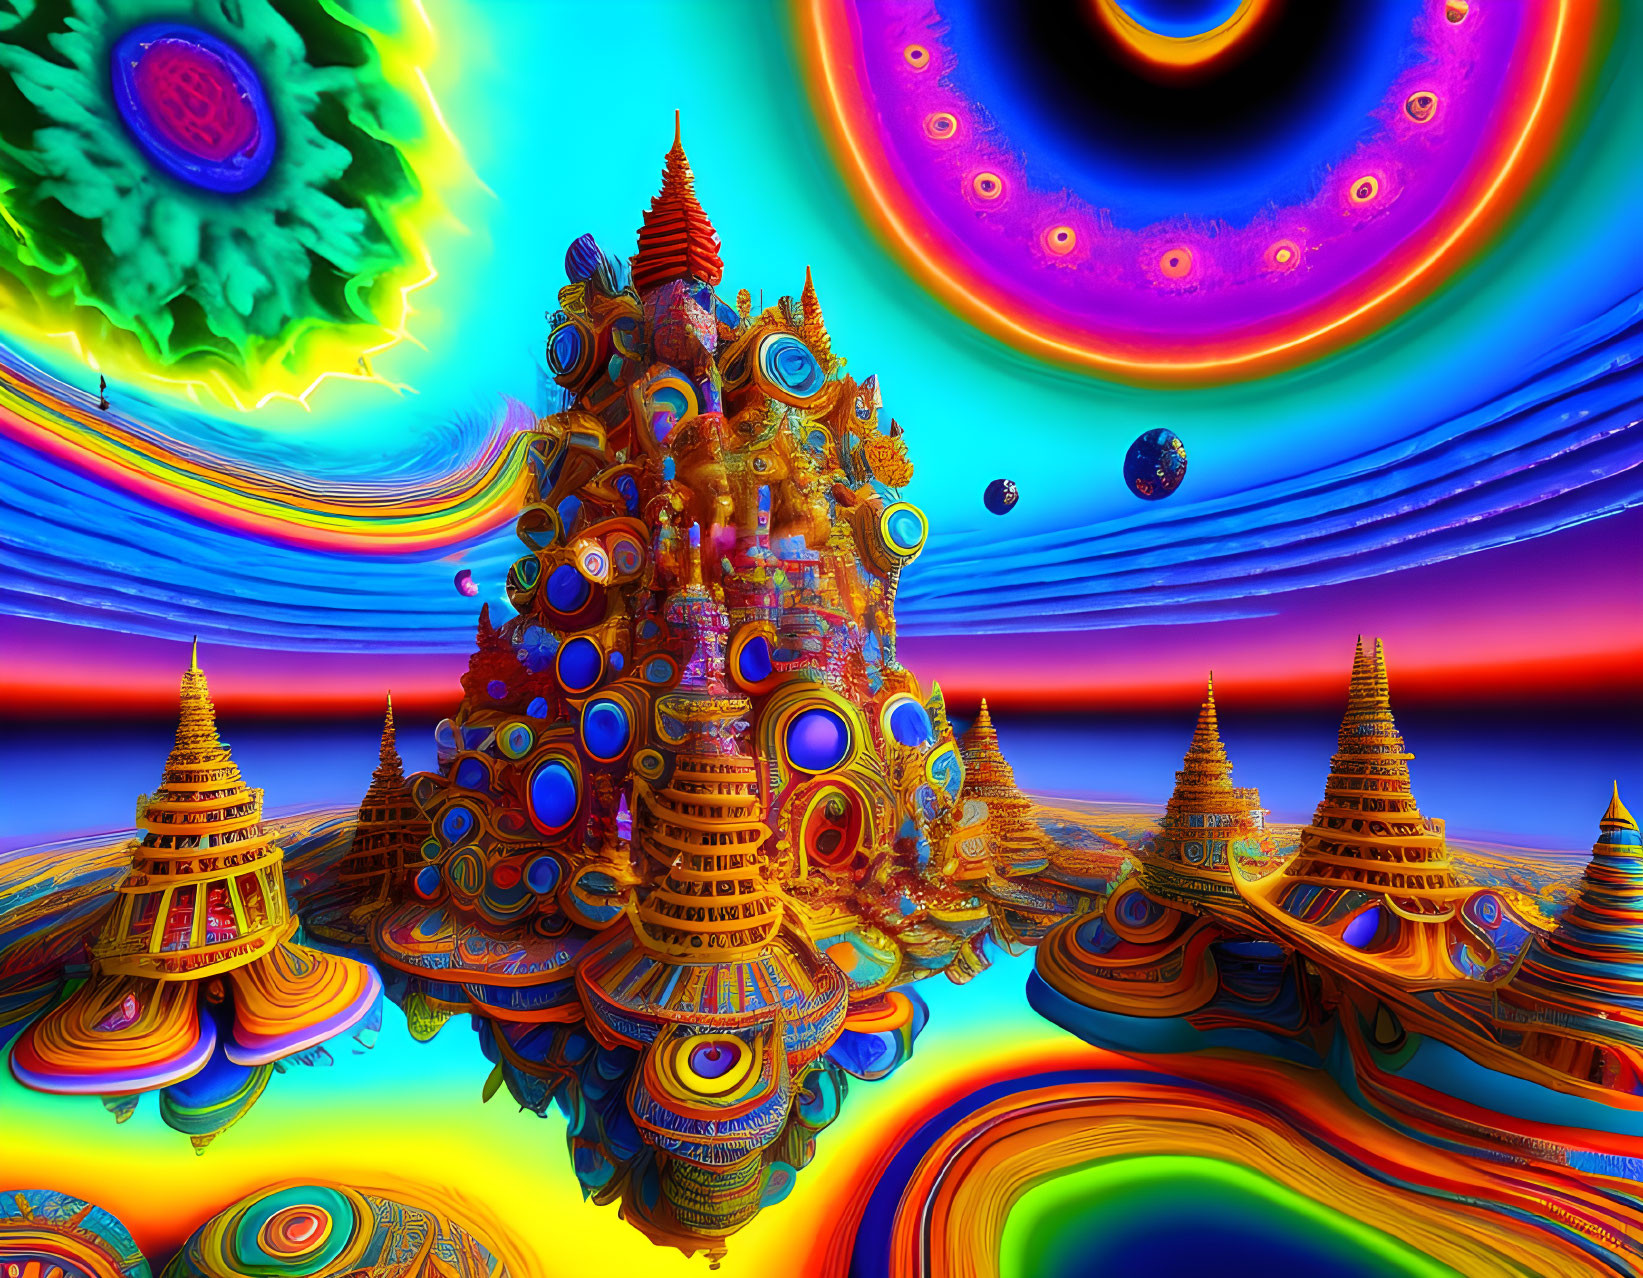 Colorful Fractal Landscape with Temple Structures and Orbs